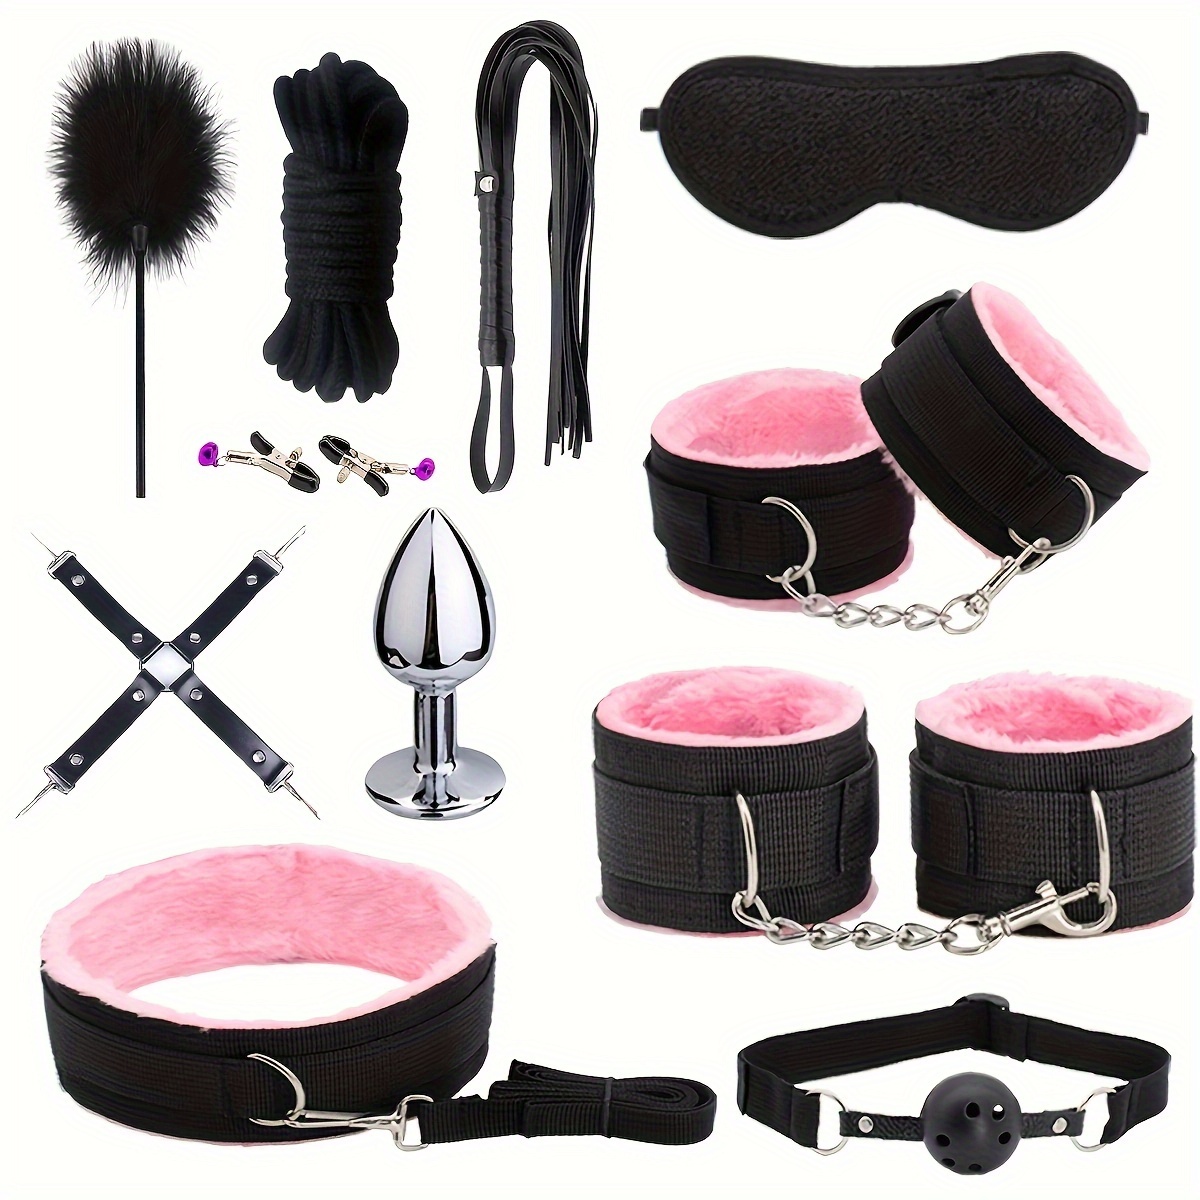 Buy BDSM Kit - 10 Pieces Bondage Kit With Nipple Clamps And